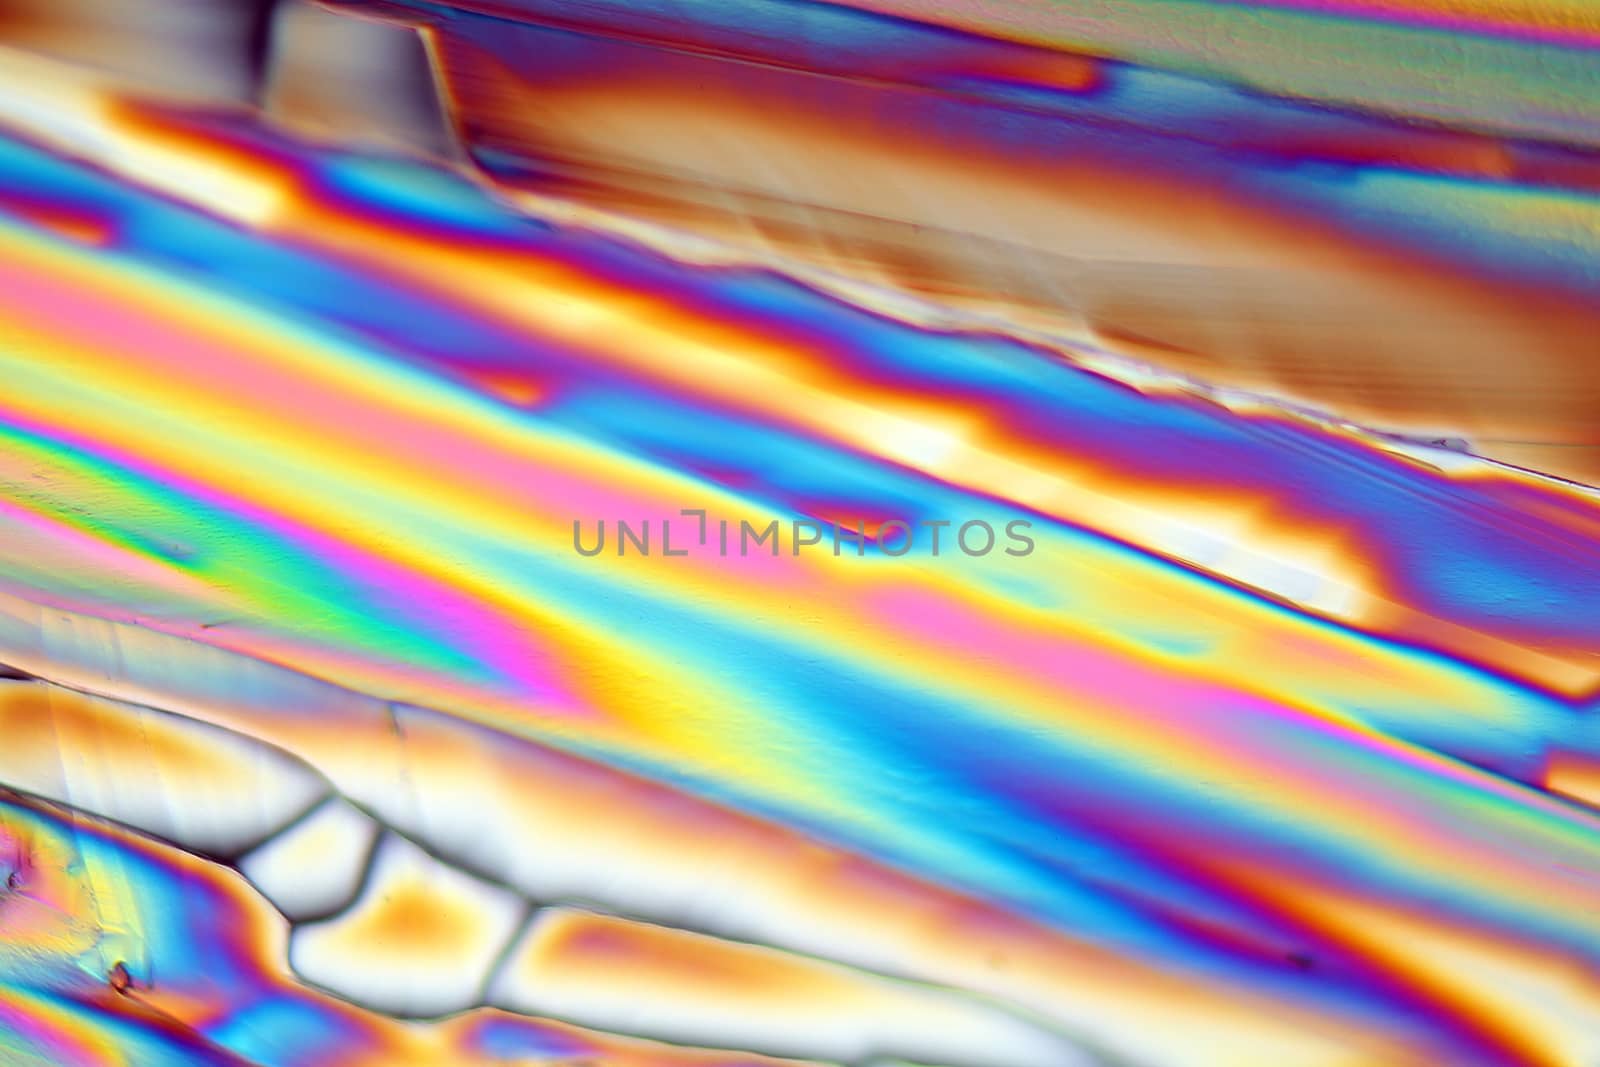 Magnesium sulfate or Epsom crystals under the microscope (magnification 80x and polarized light).